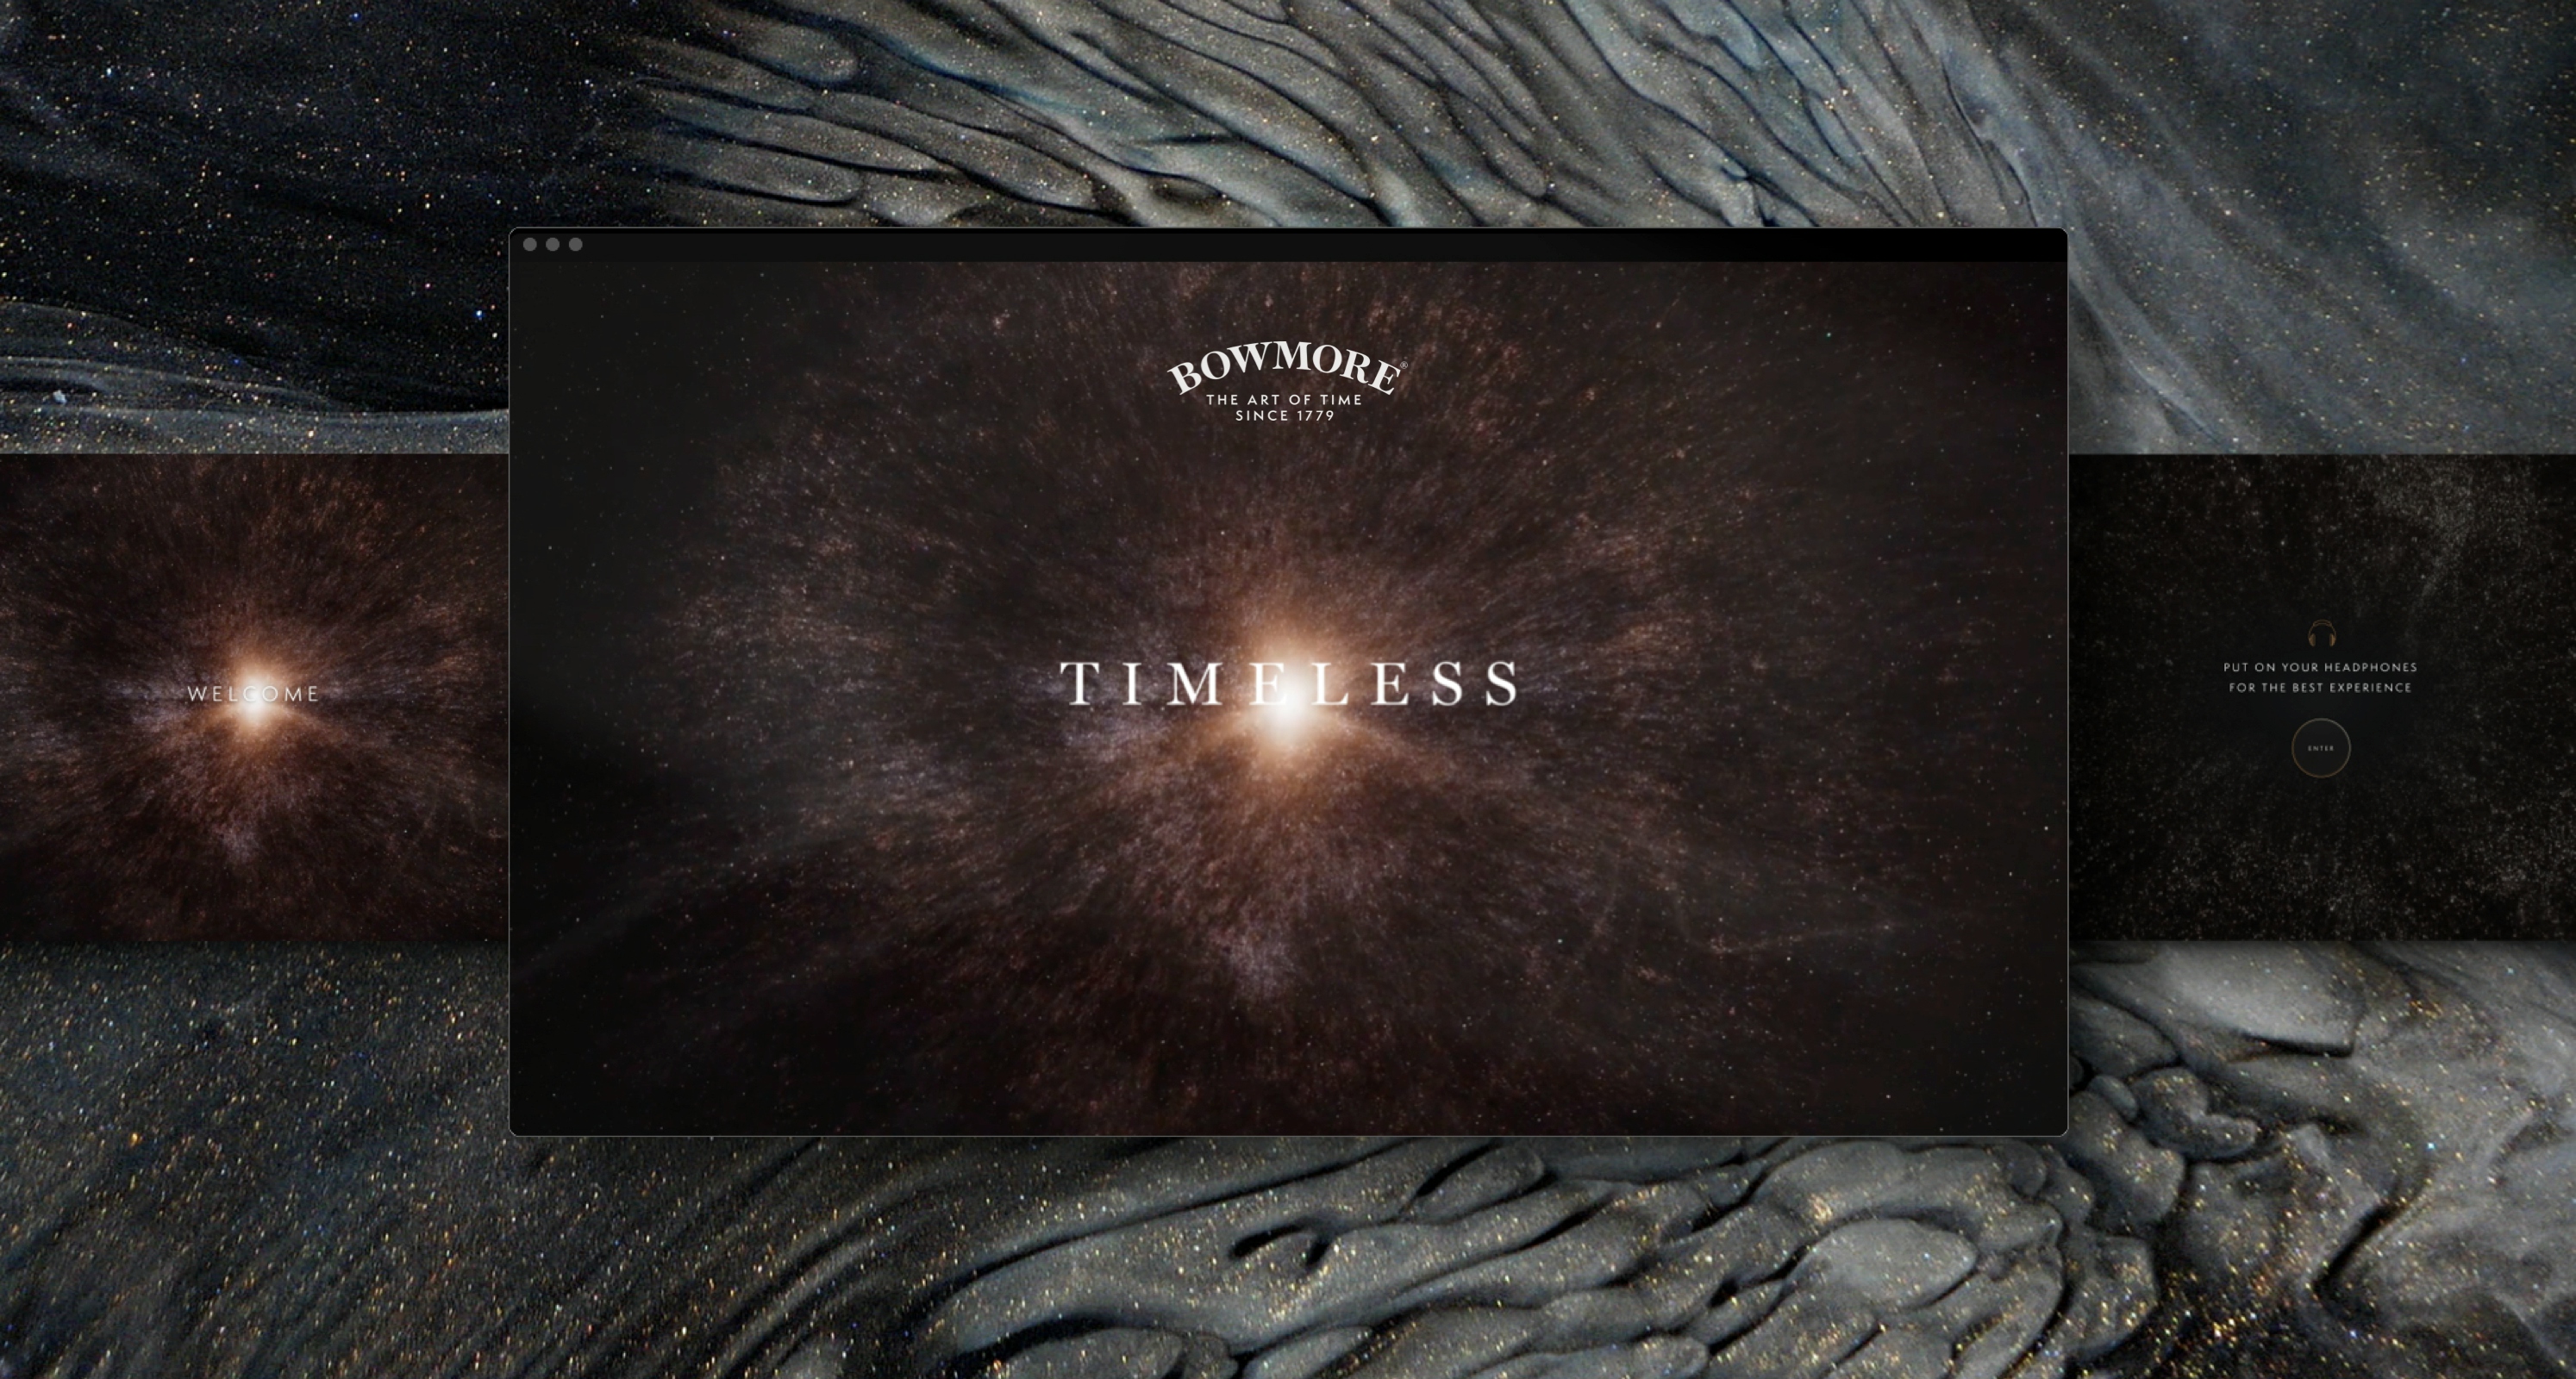 A desktop view of Bowmore Timeless on a space background